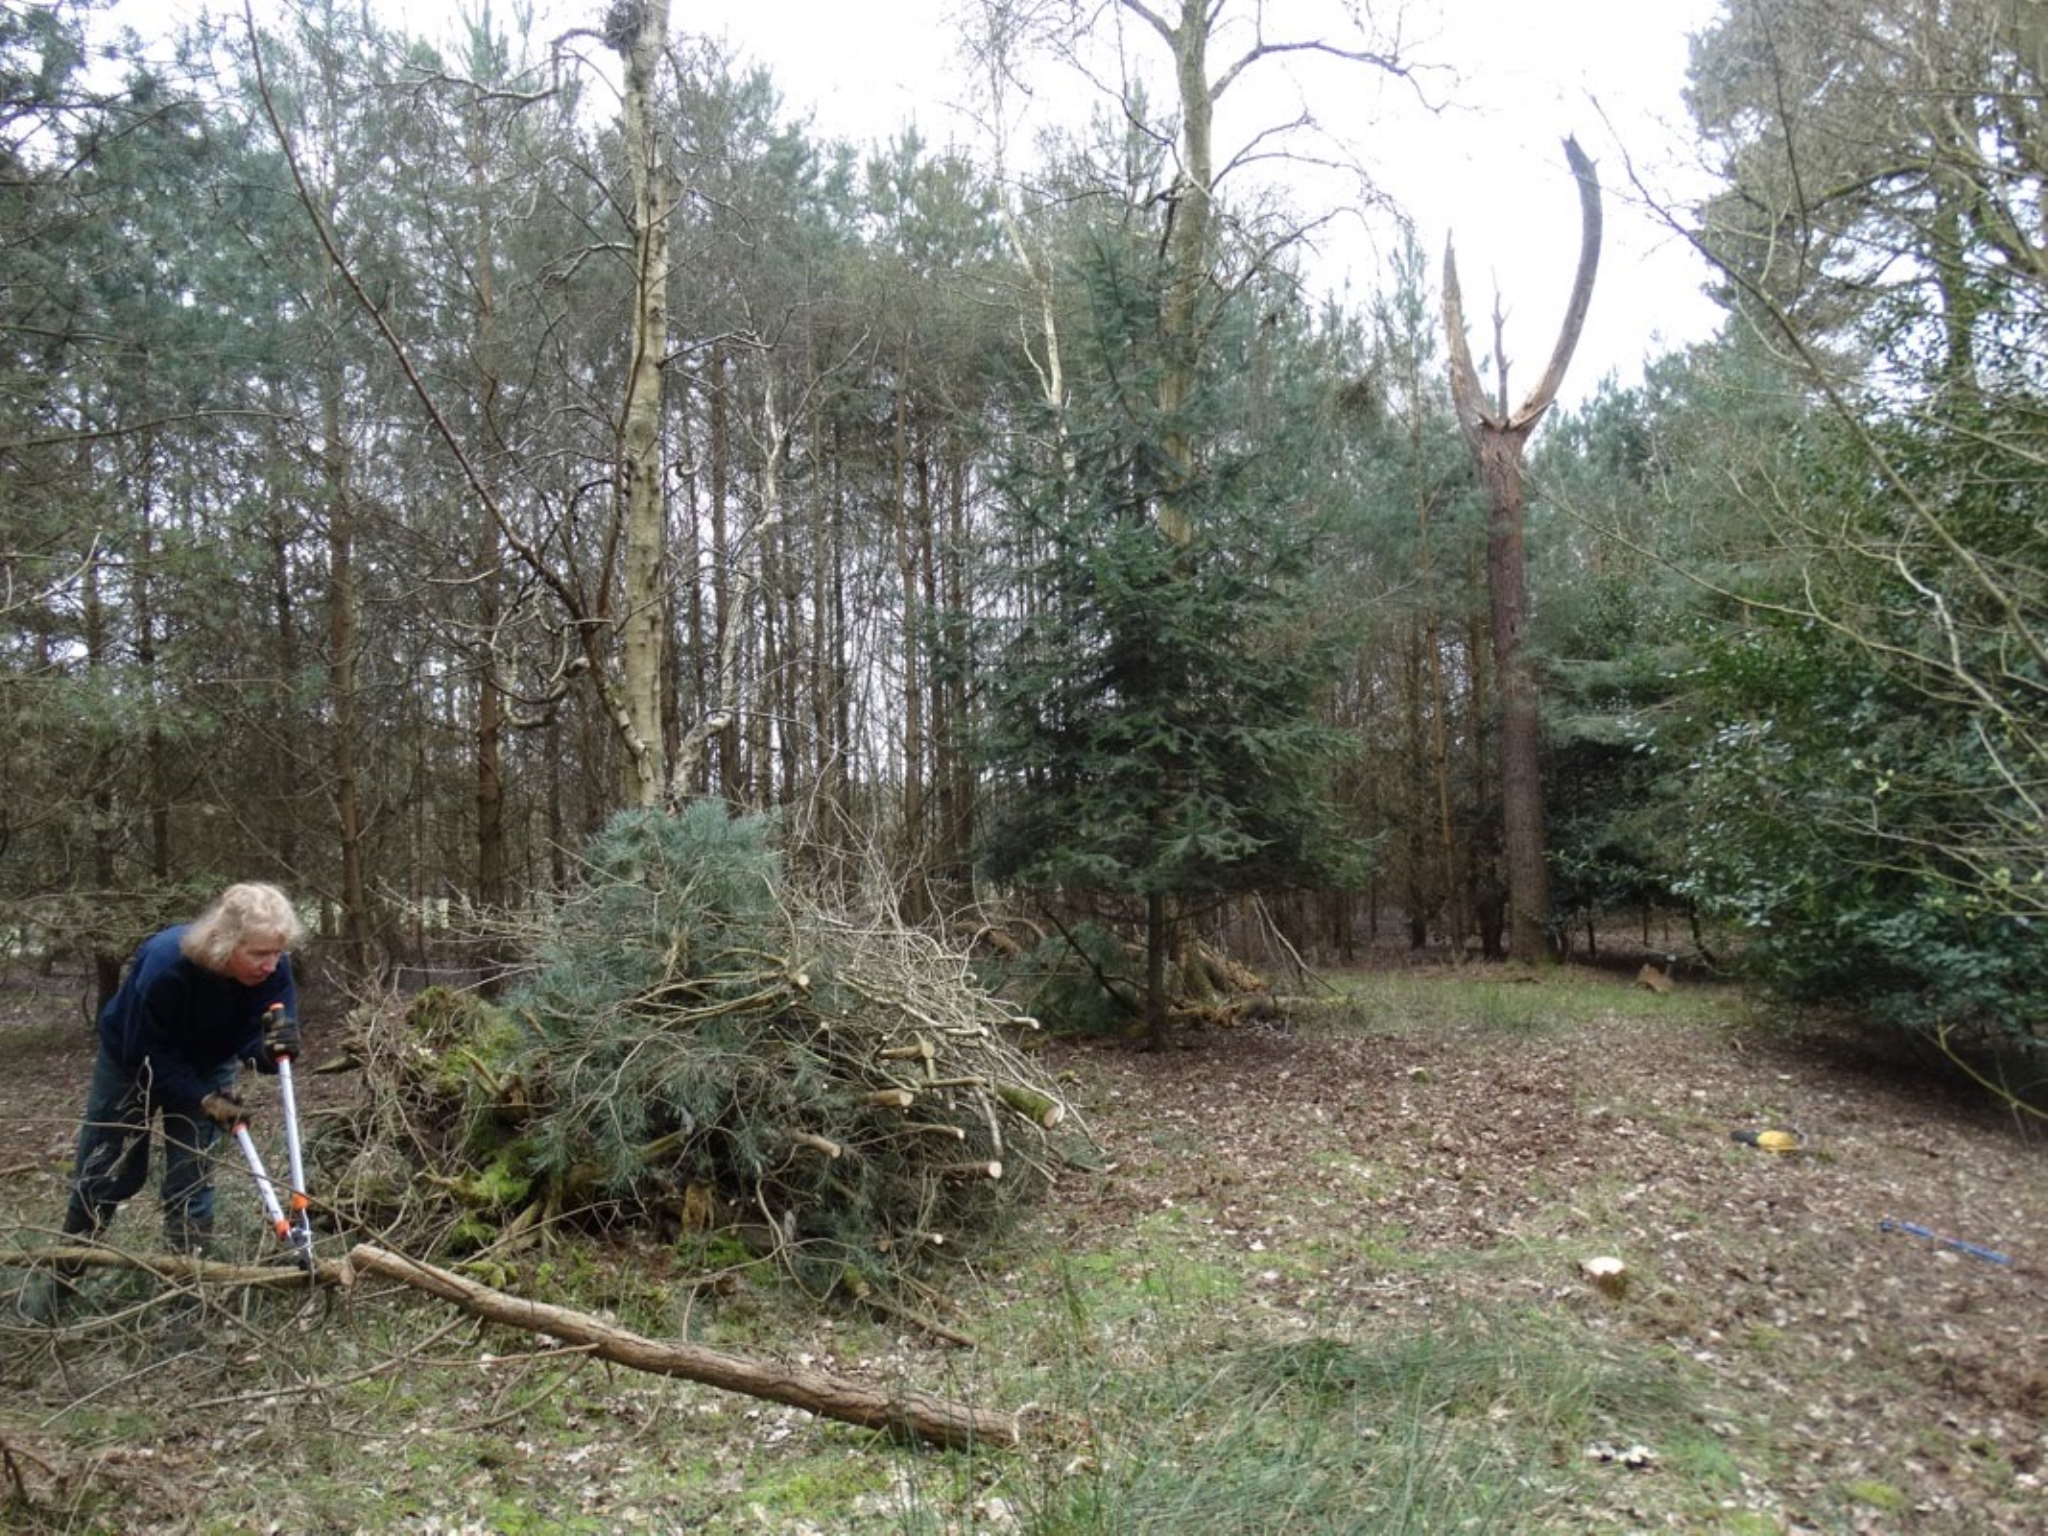 A photo from the FoTF Conservation Event - April 2018 - Improving habitat at High Lodge : A volunteers cuts apart a felled tree